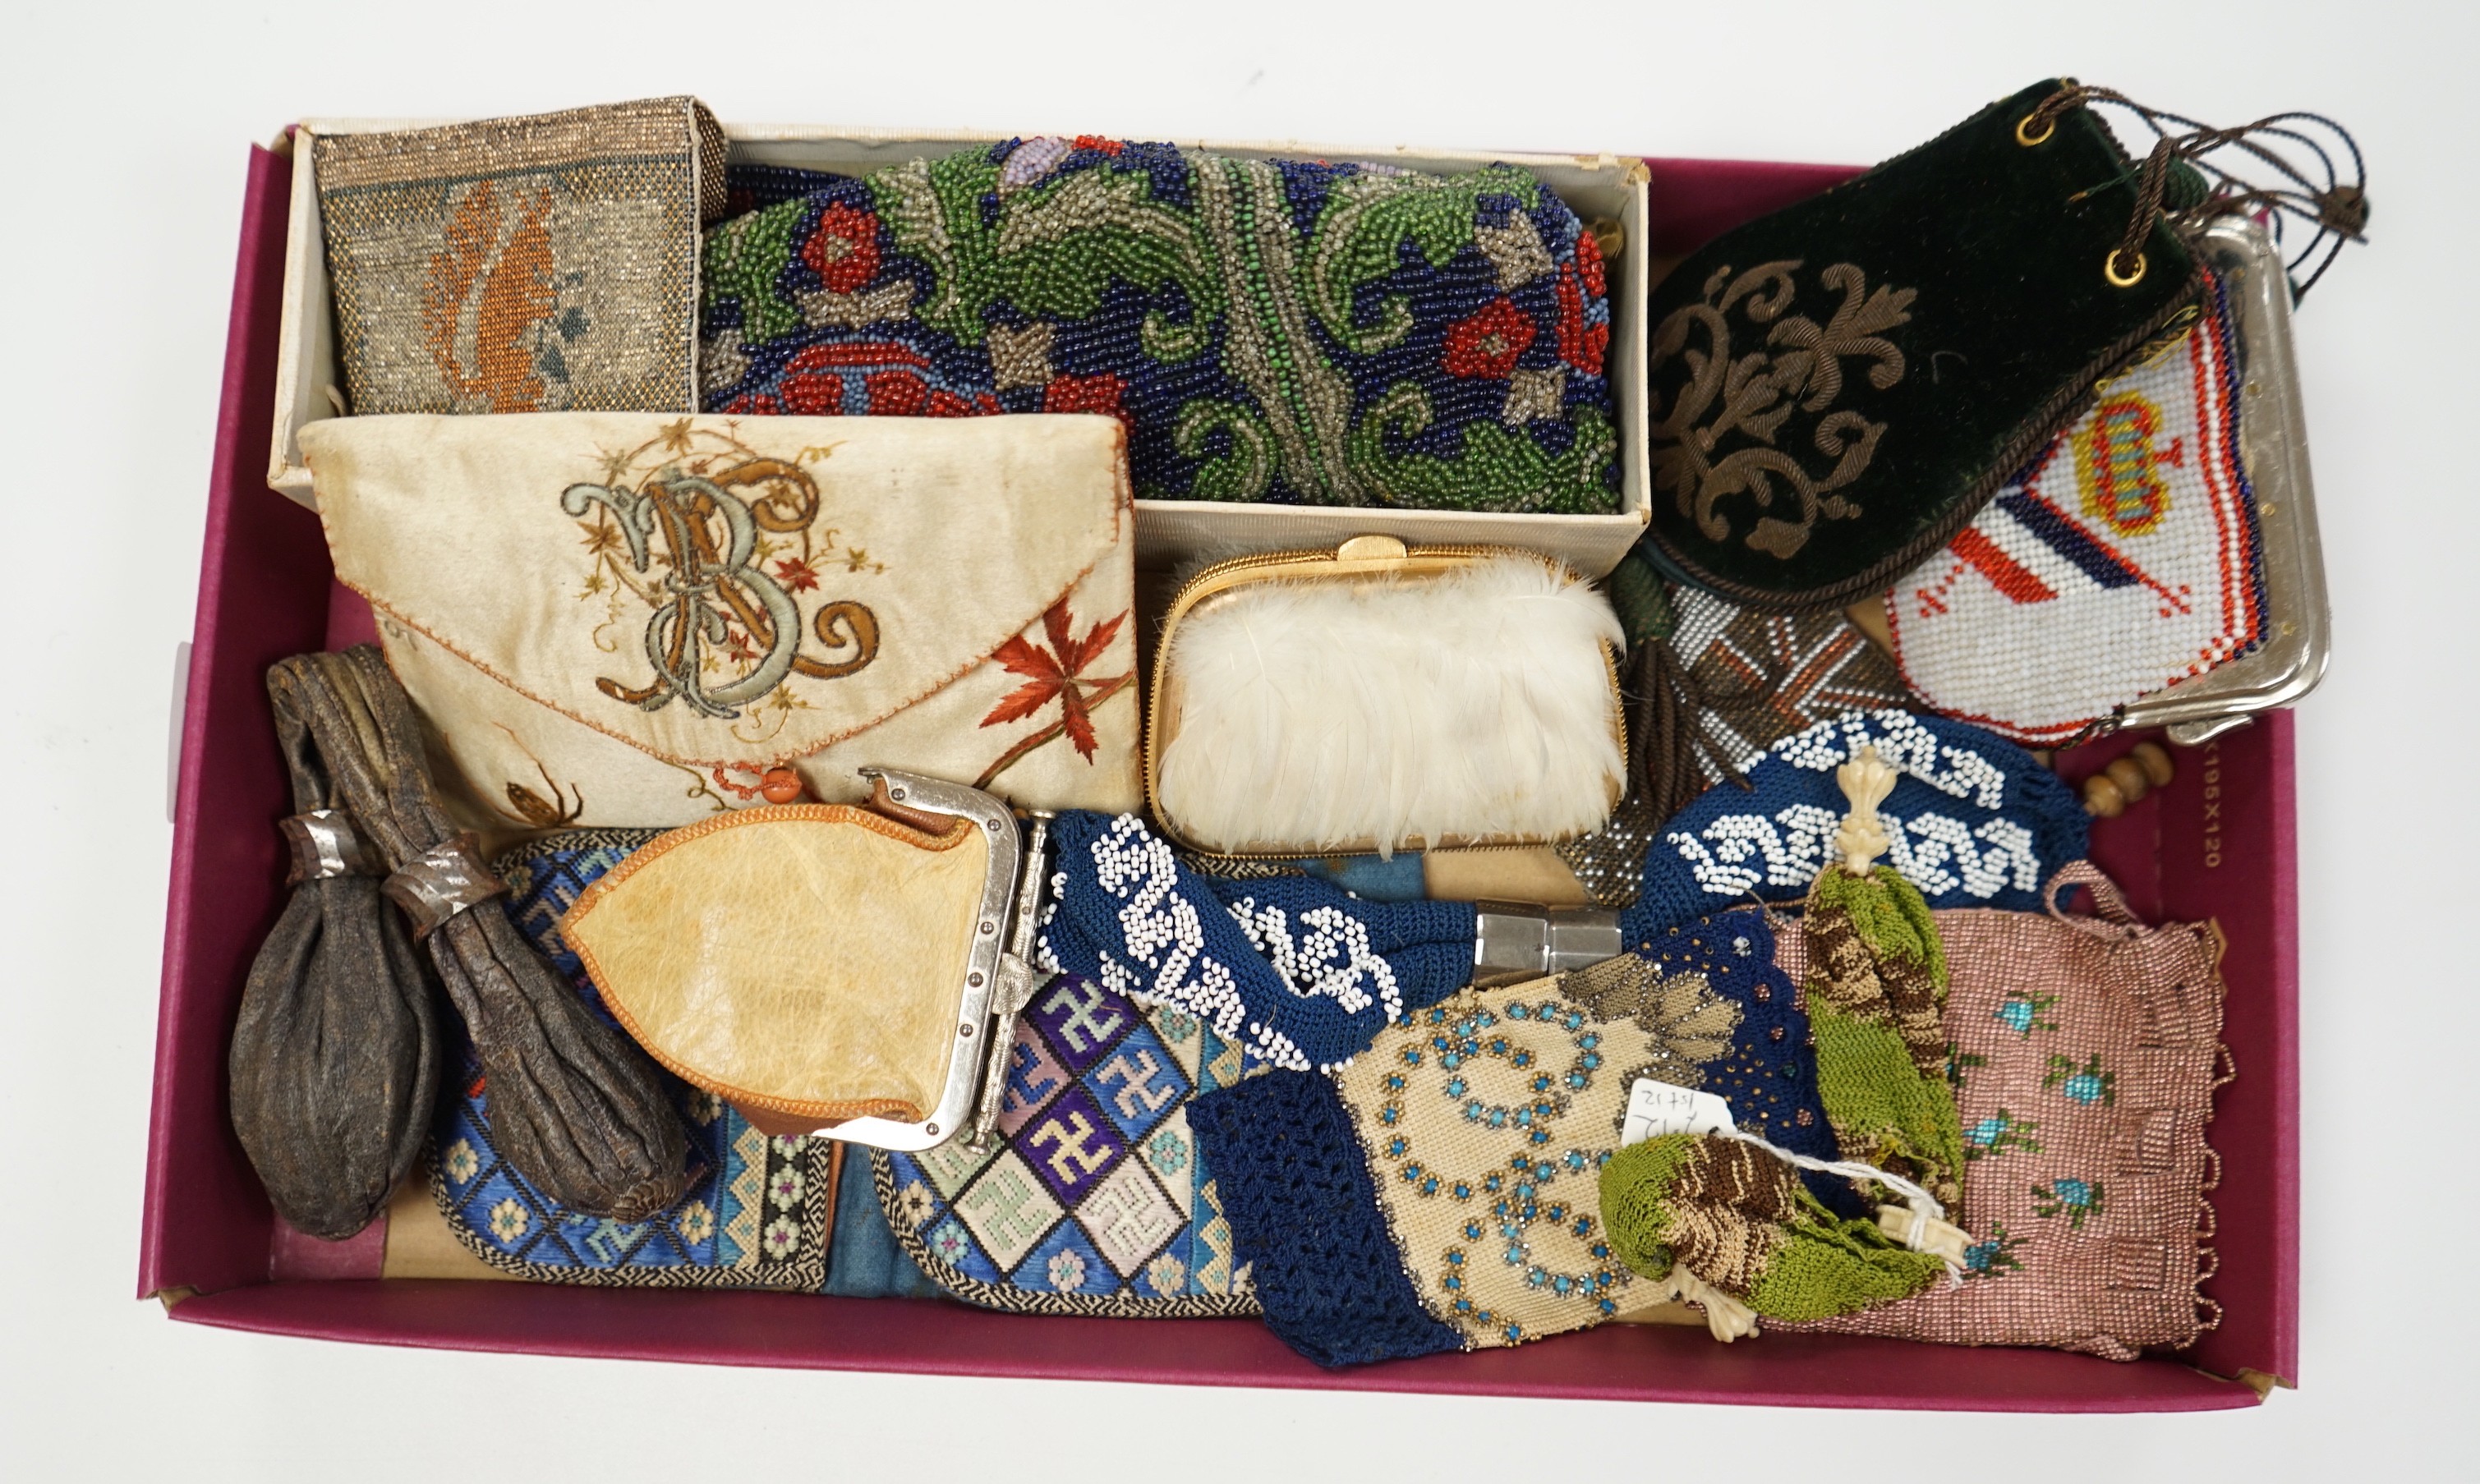 A velvet and metal embroidered reticule possibly 18th century, together with a collection of beaded embroidered knitted and leather purses, bags misers purses and a feather coin purse(14)